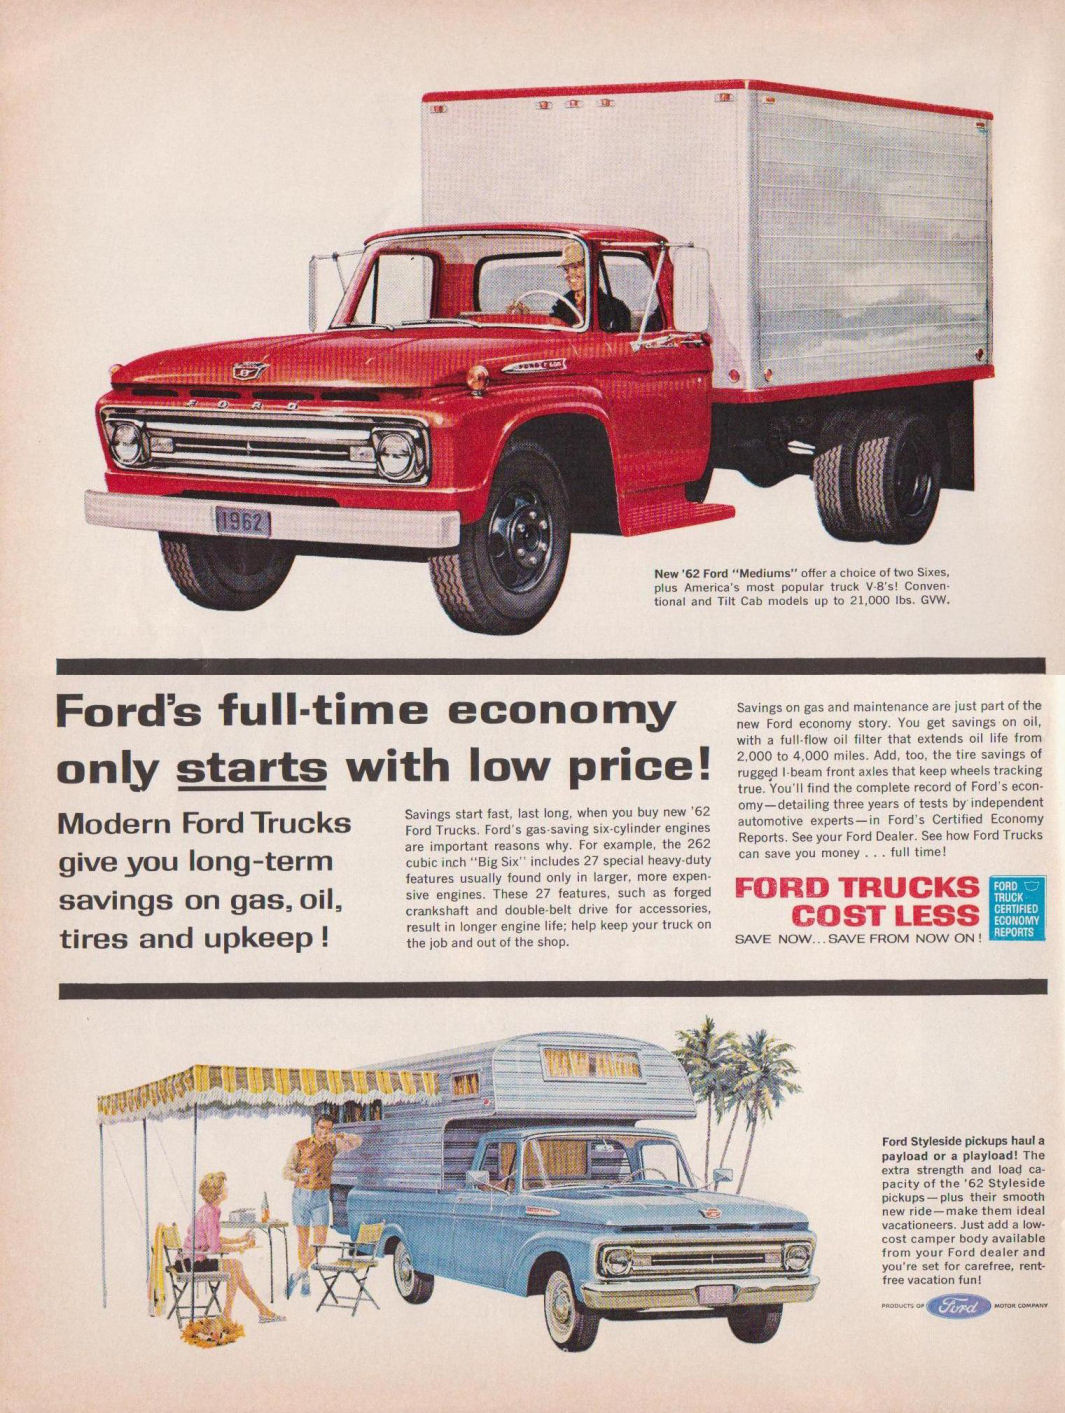 VINTAGE AND CLASSIC FORD CARS - COLLECTOR INFORMATION | COLLECTORS